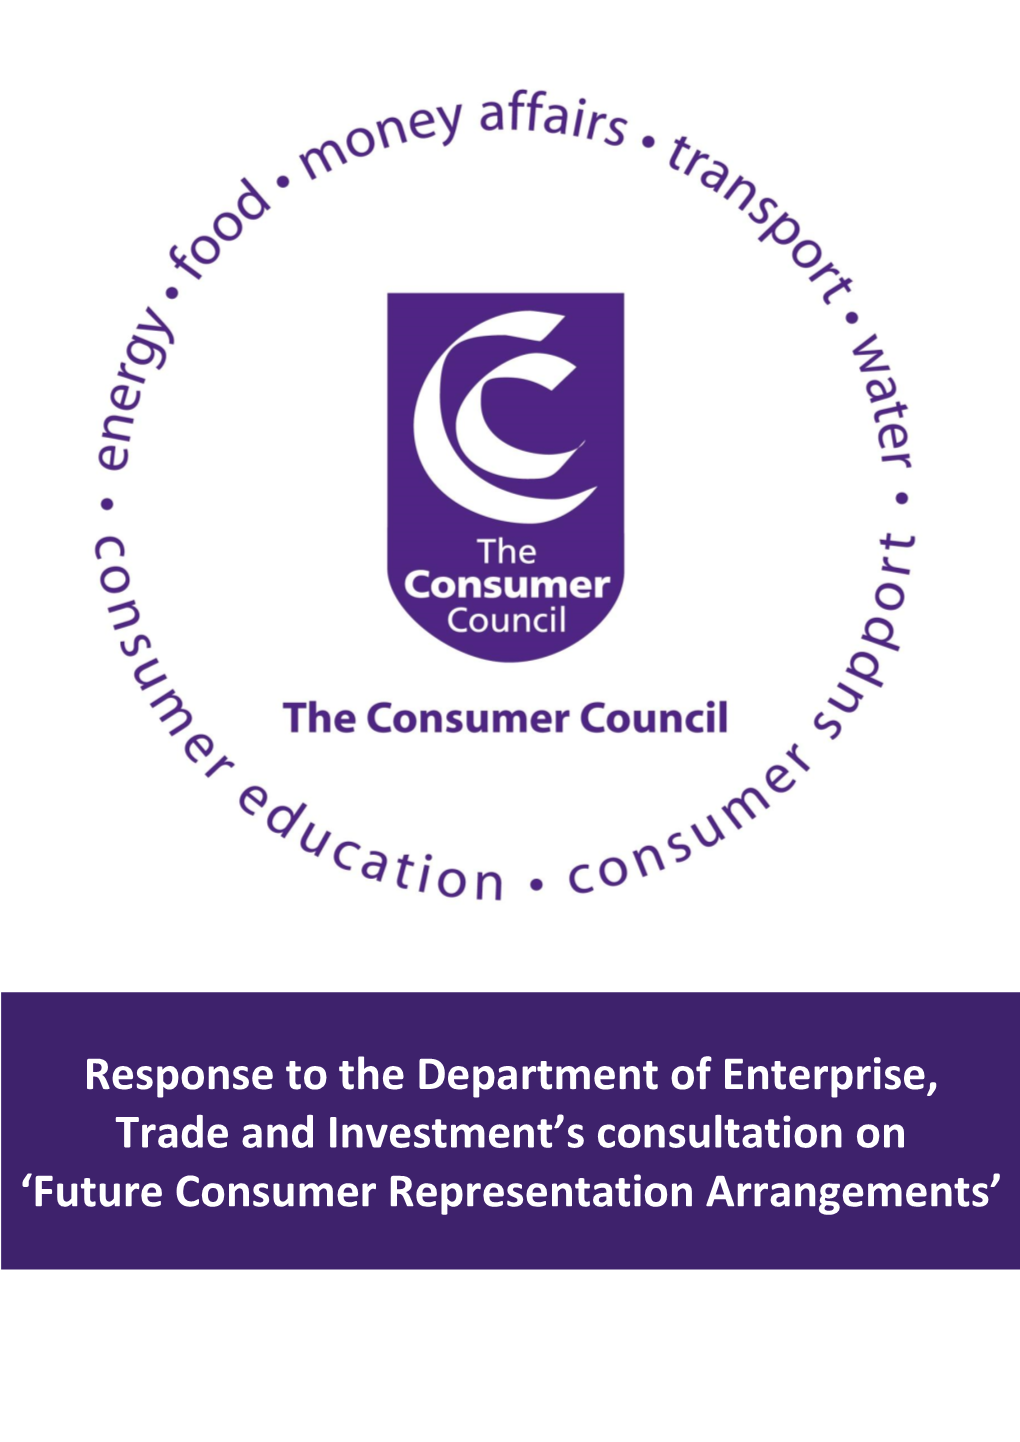 Response to the Department of Enterprise, Trade and Investment's